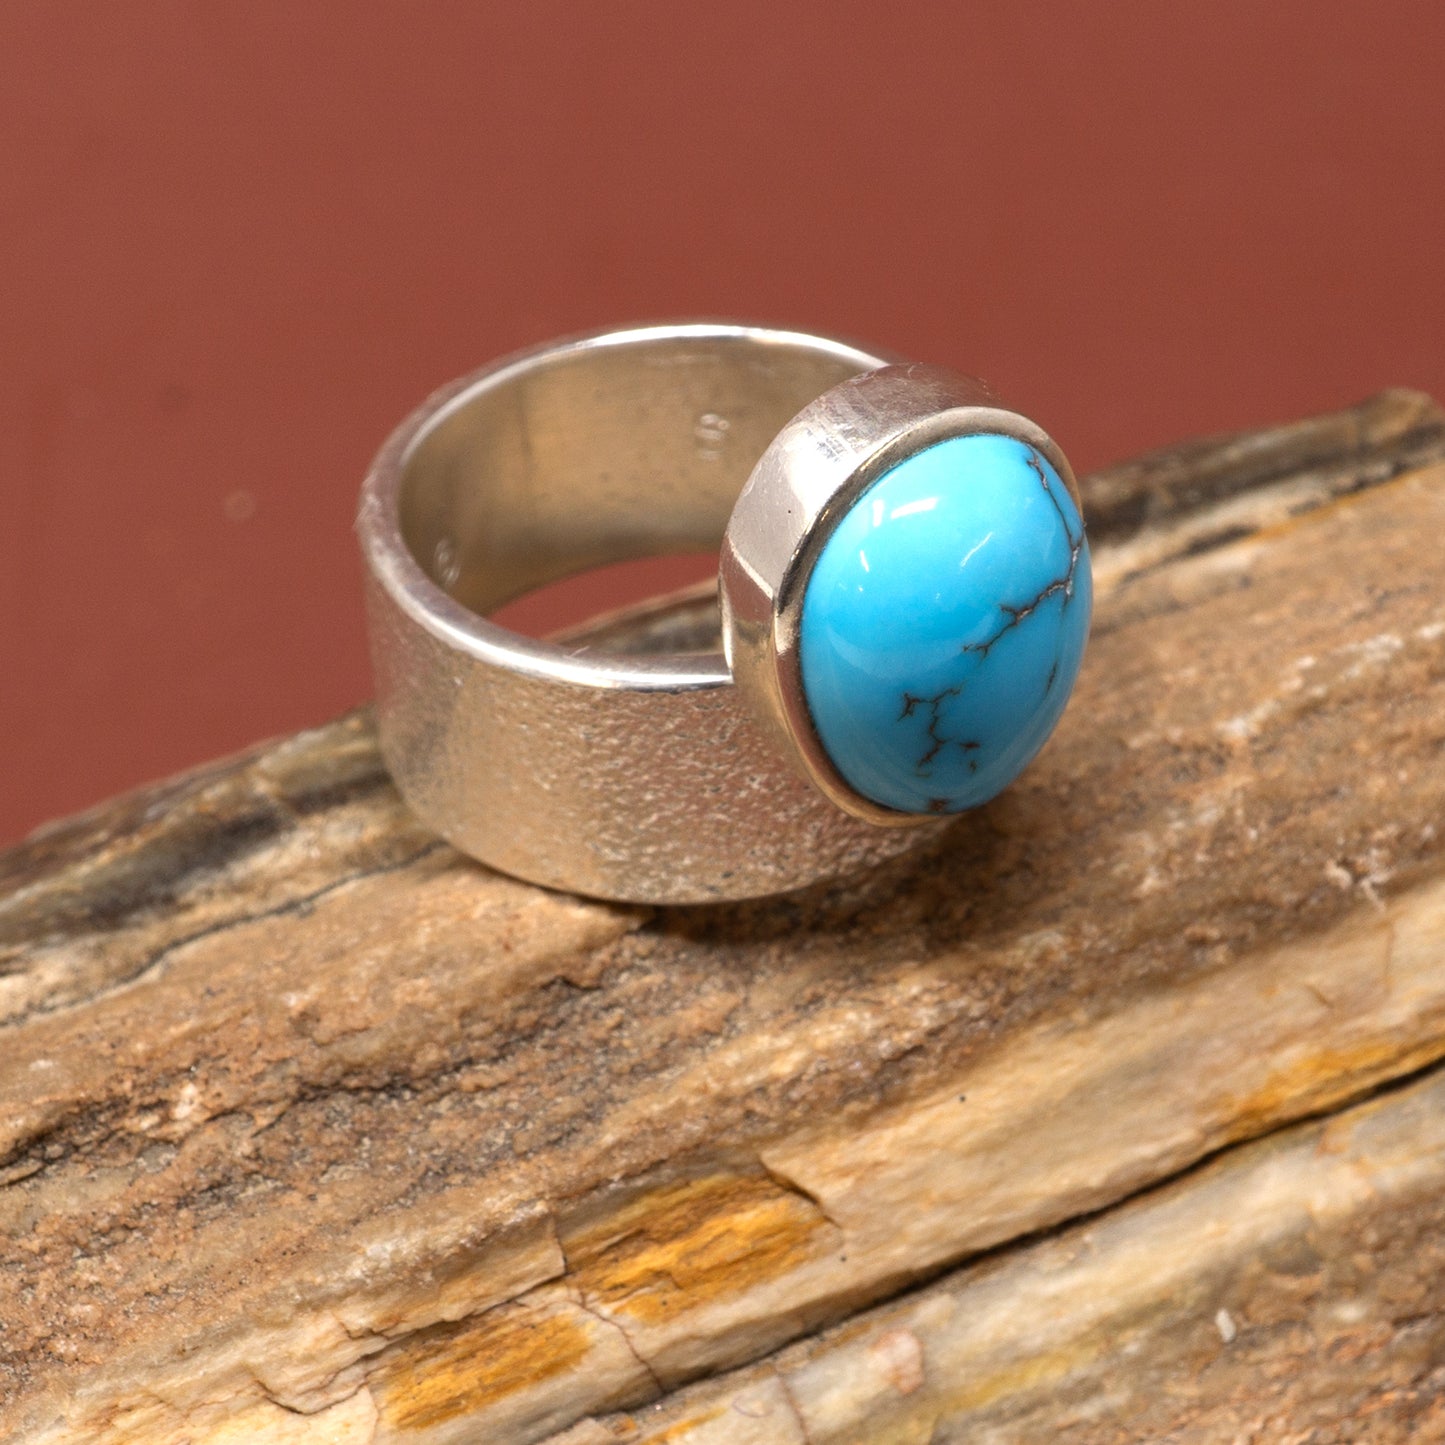 Turquoise Cabochon in Cast Silver Ring by DDB | Size 9